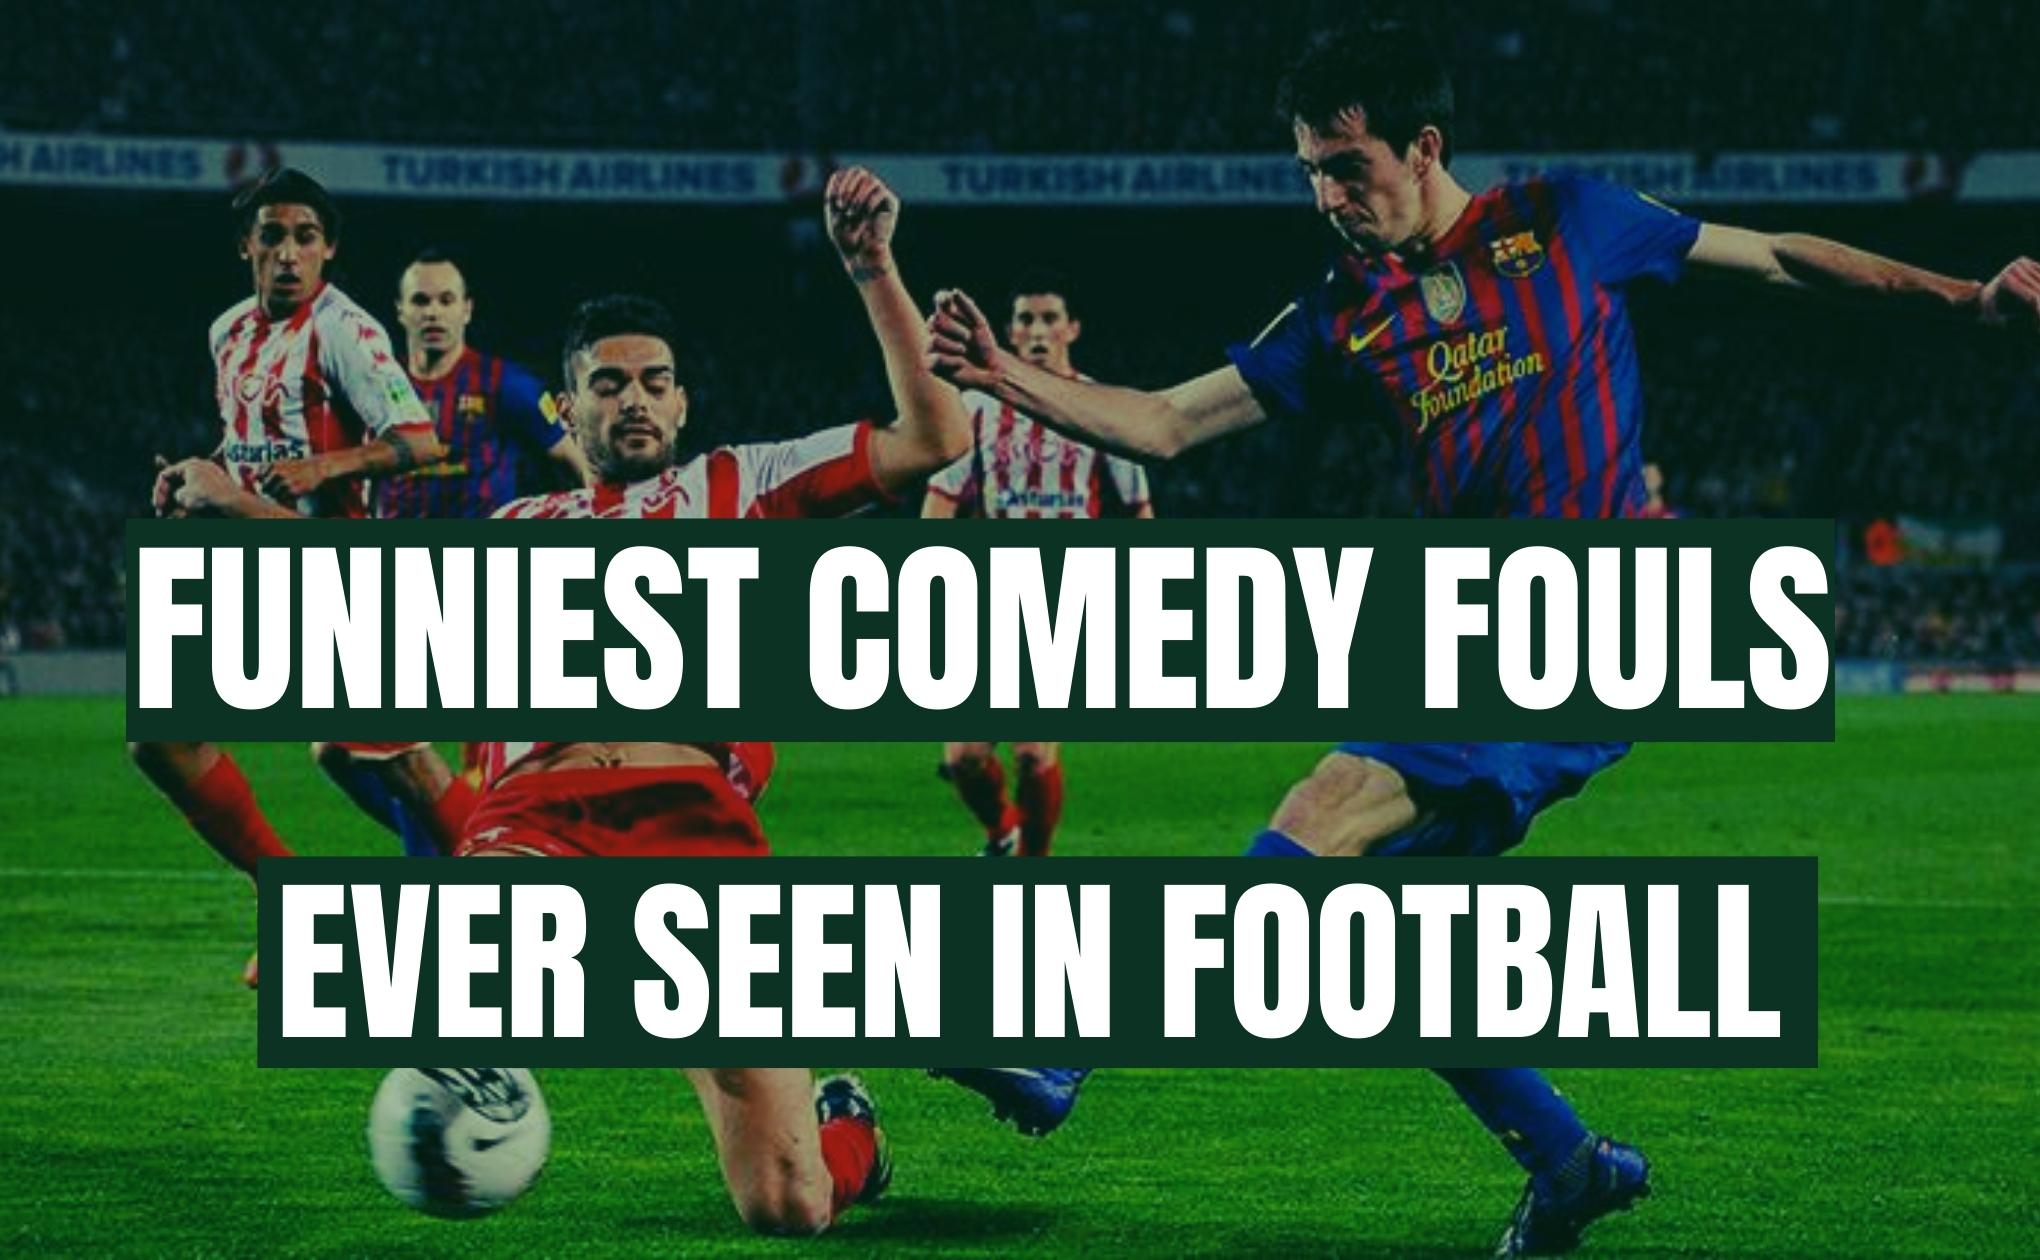 Funniest Comedy Fouls Ever Seen in Football